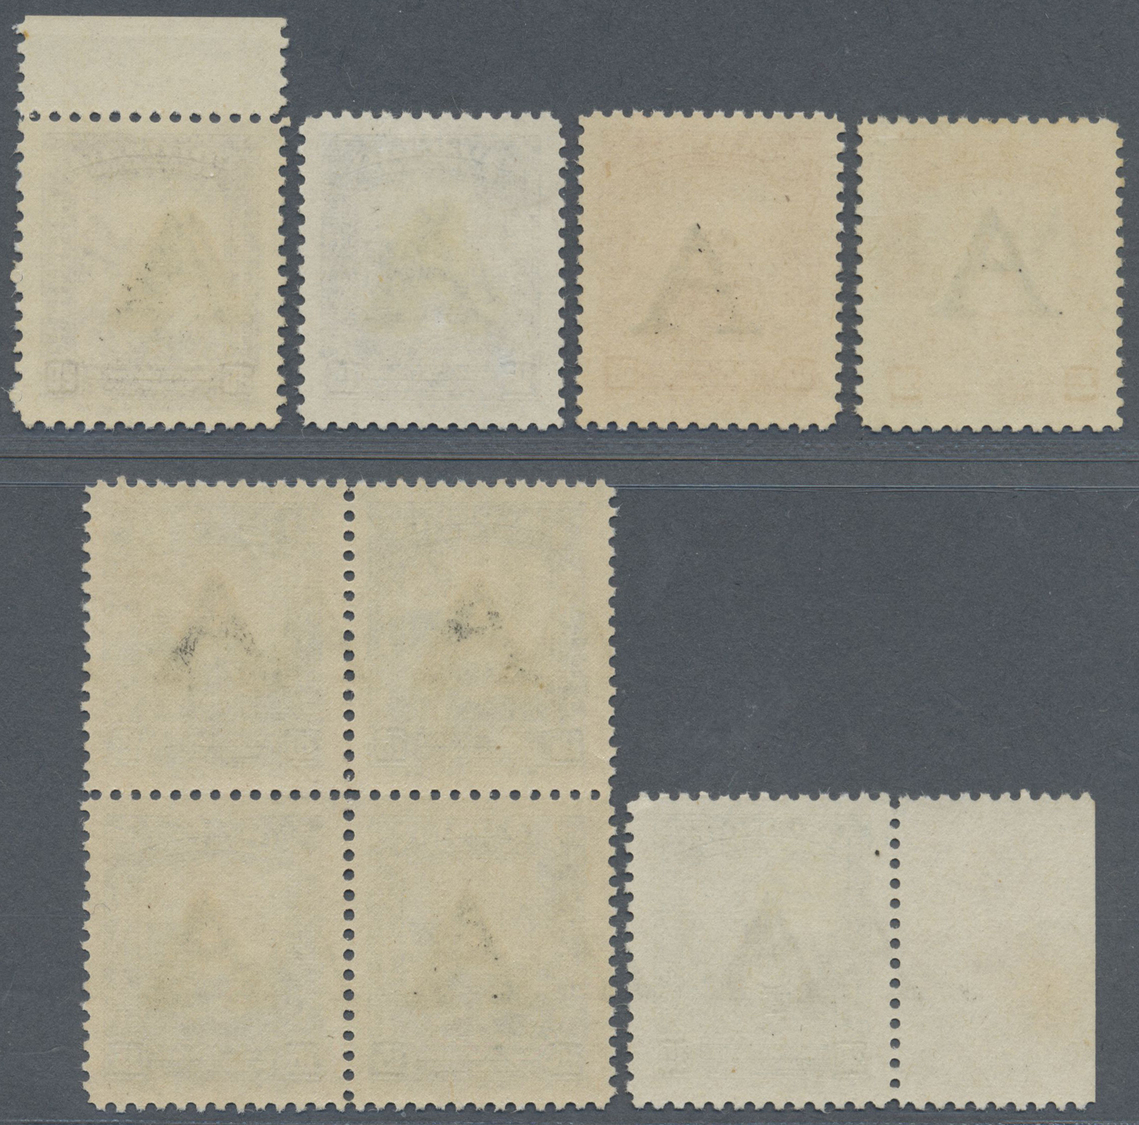 **/* Kolumbien: 1950, Country Scenes Airmail Issue Nine Values With DOUBLE Opt. 'A' (Avianca) Incl. 5c. Orange To 30c. G - Colombie